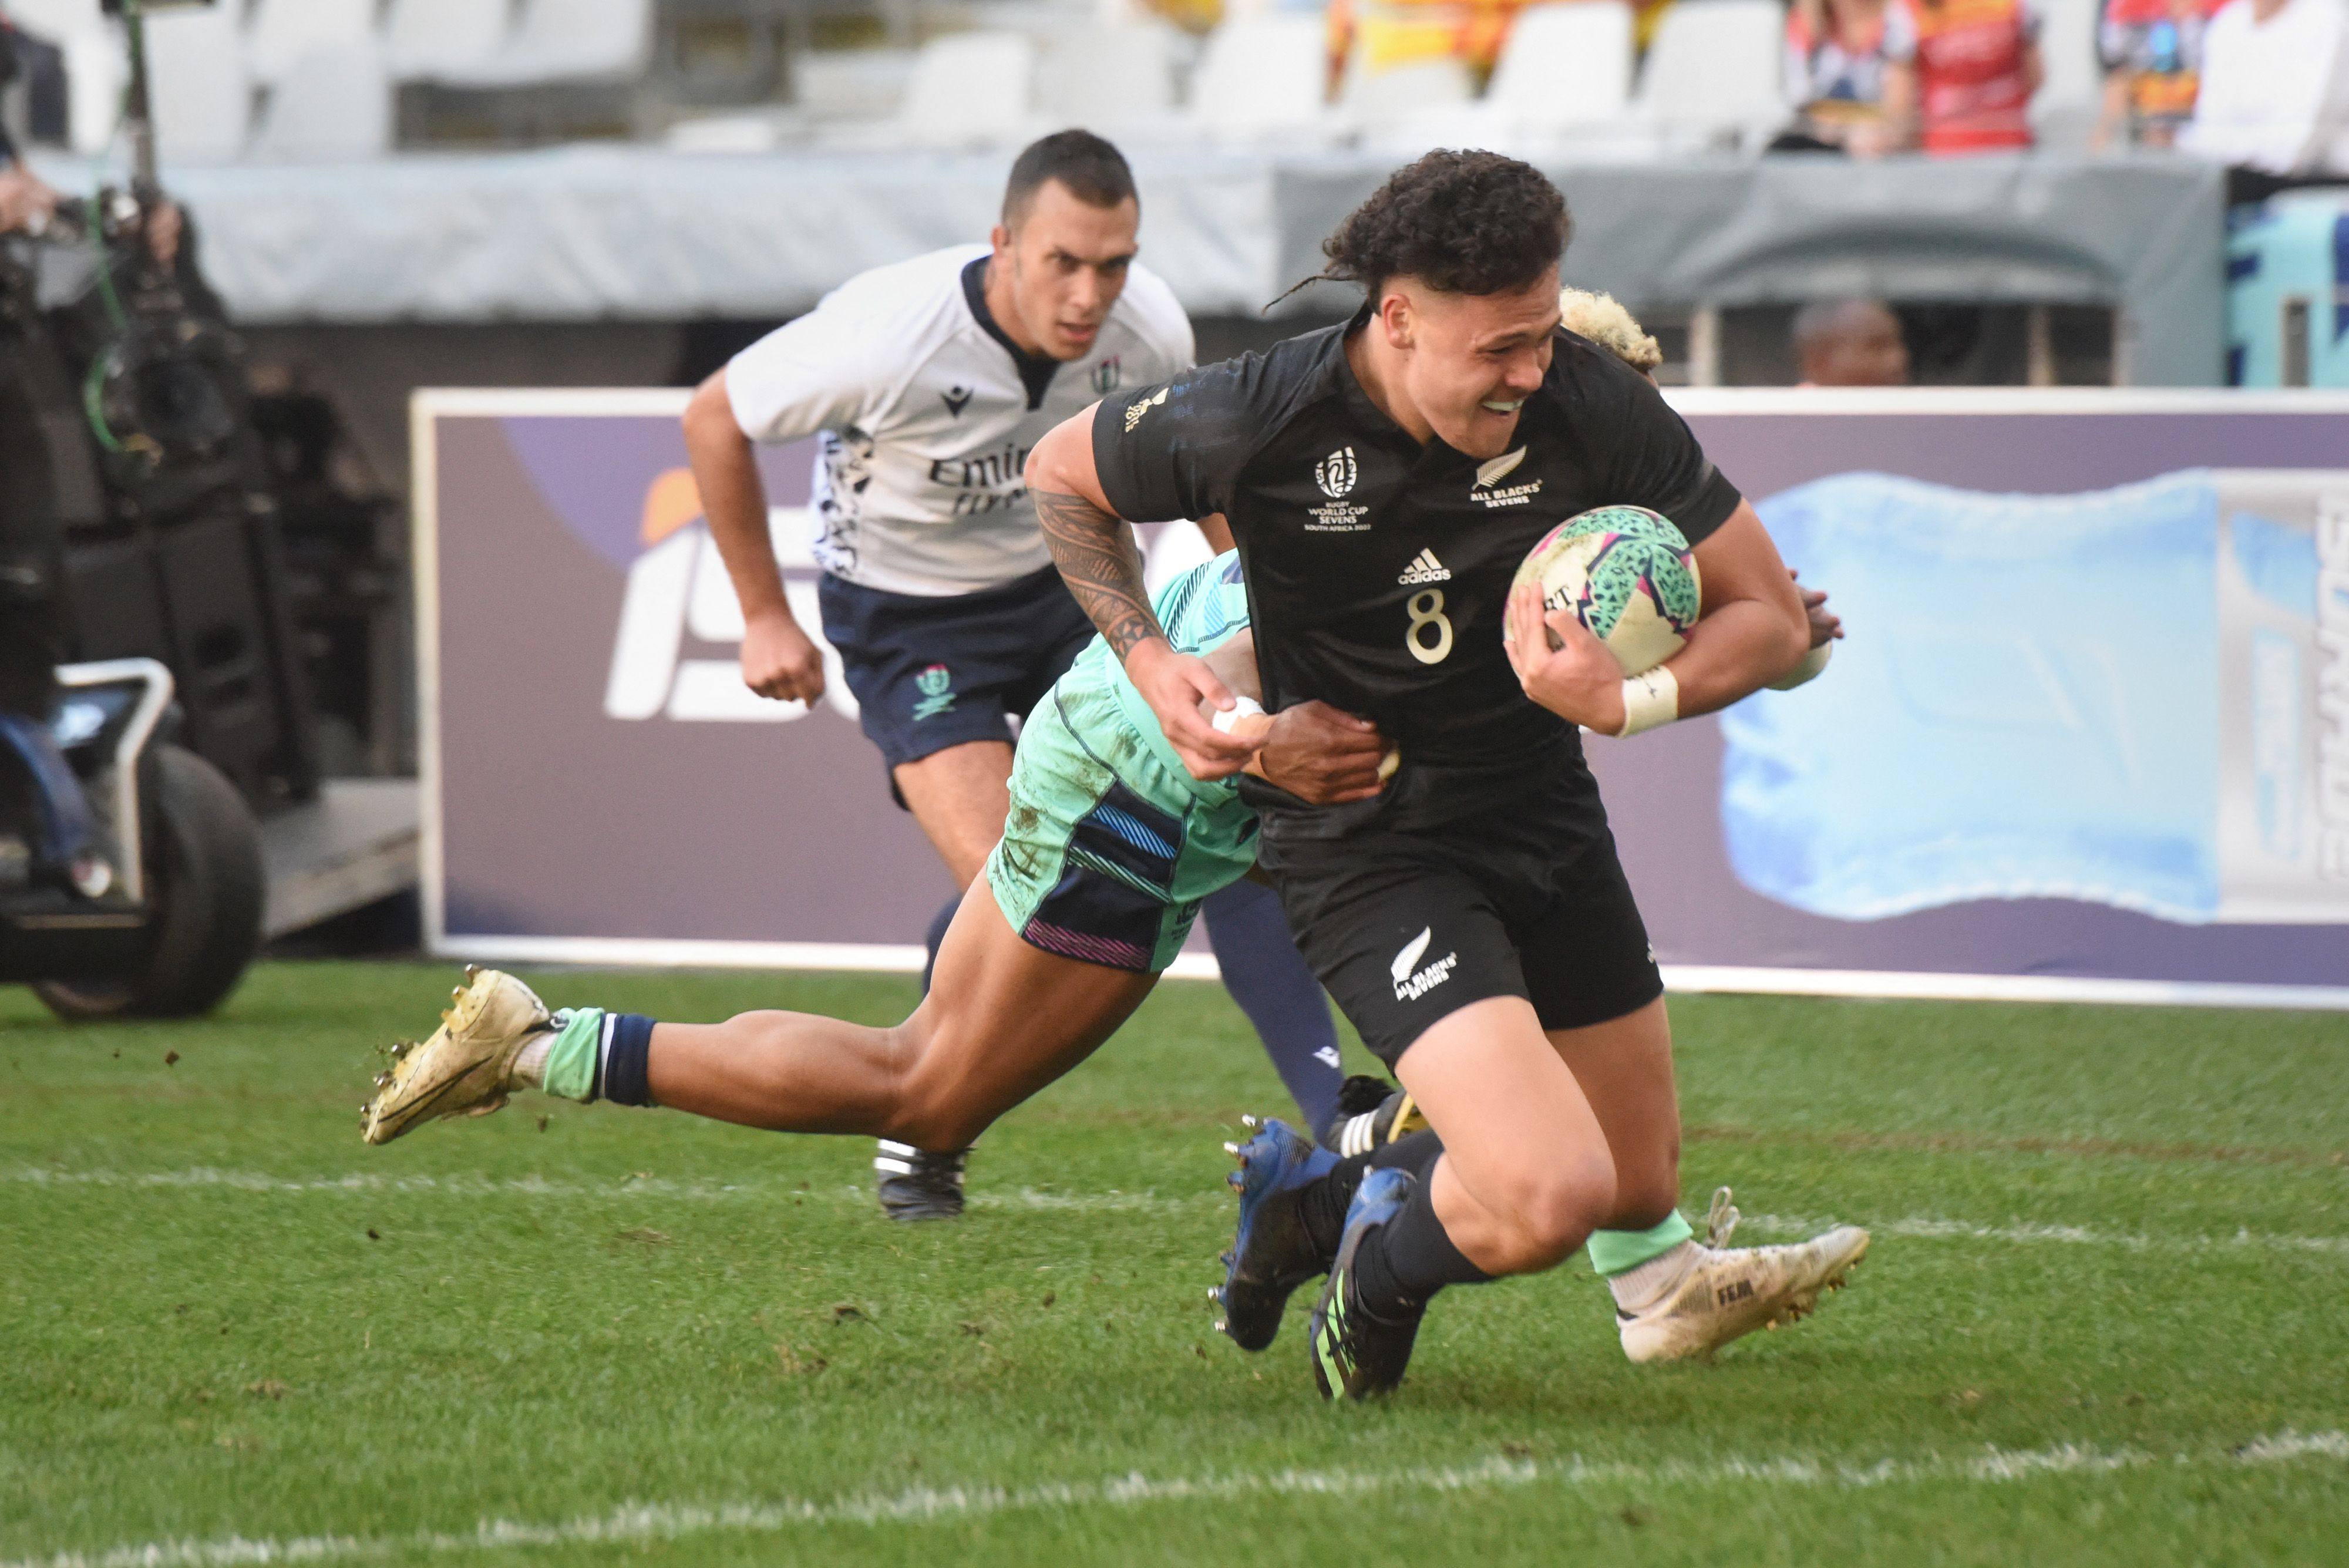 Caleb Tangitau of New Zealand scores a try against Scotland at the Rugby World Cup Sevens in Cape Town. Photo: AFP